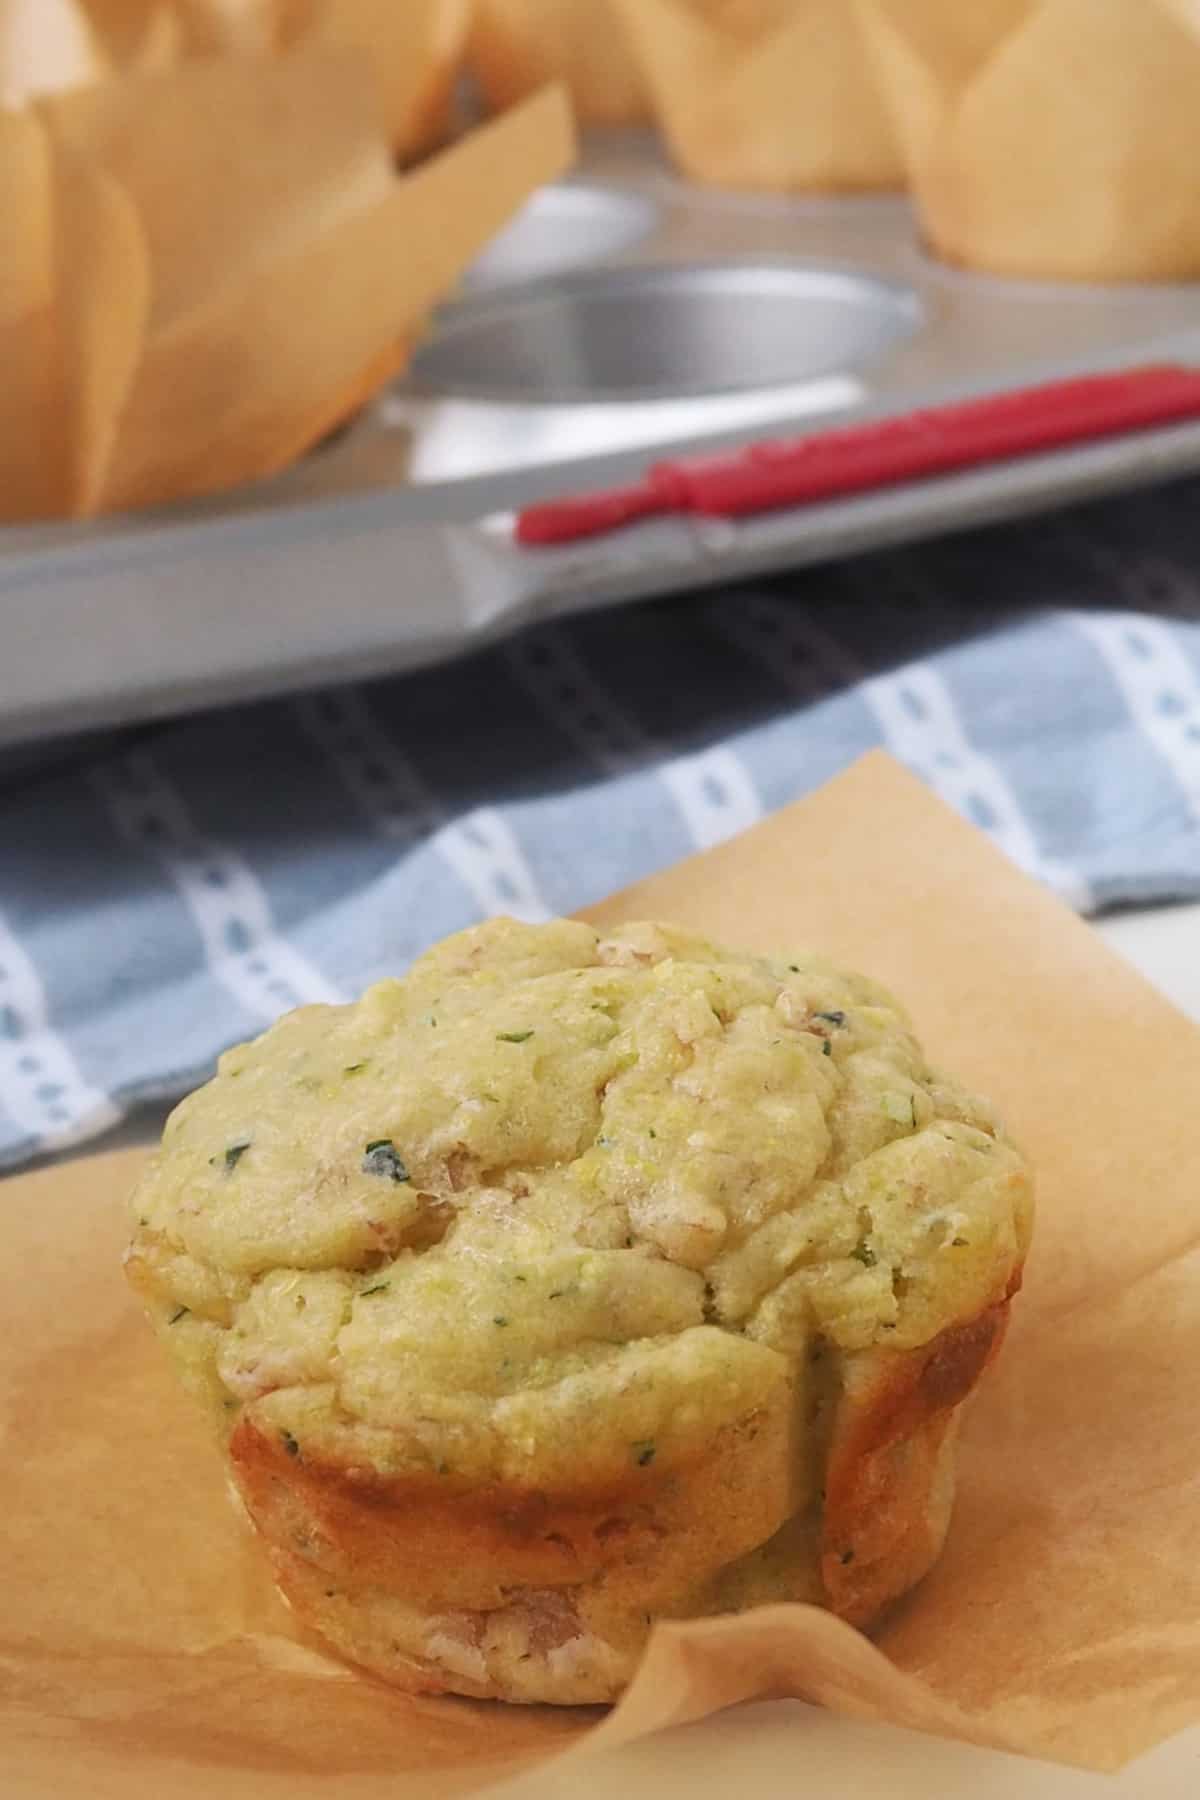 Savoury Muffin in brown paper case on a white surface. In the background is a tray filled with more savoury muffins.